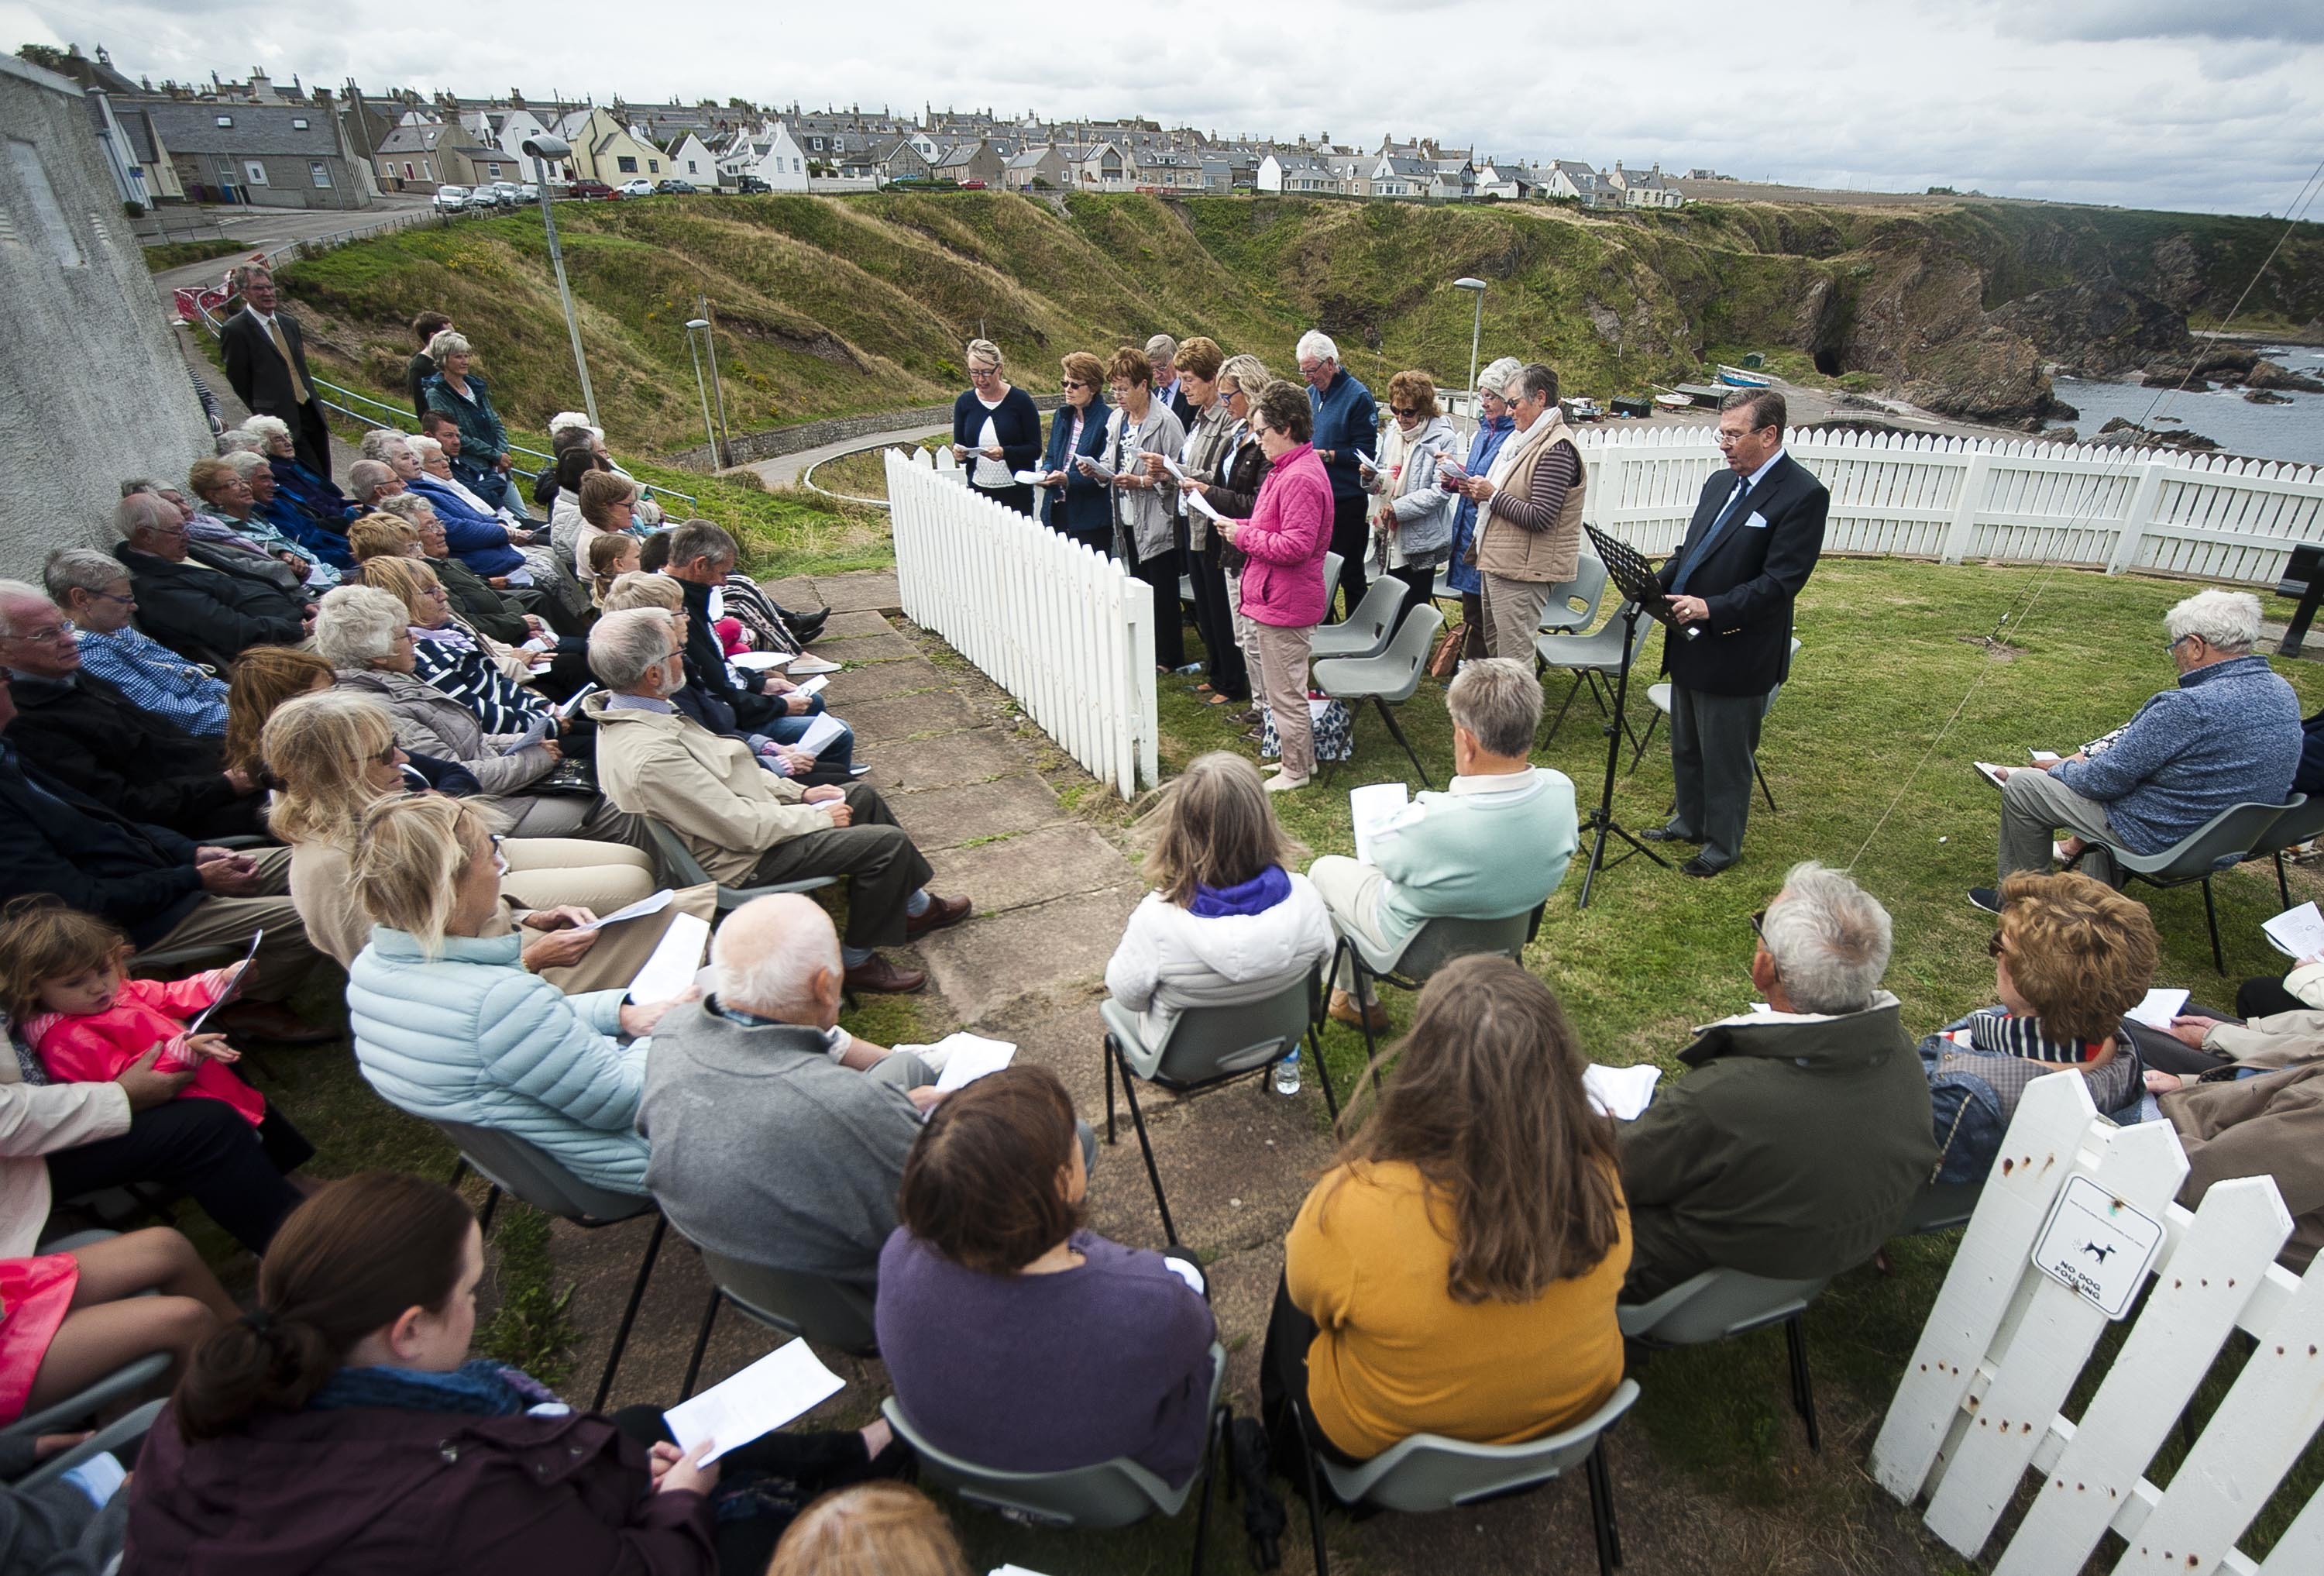 Portknockie Church hosted an open-air service as part of its 150th anniversary celebrations.